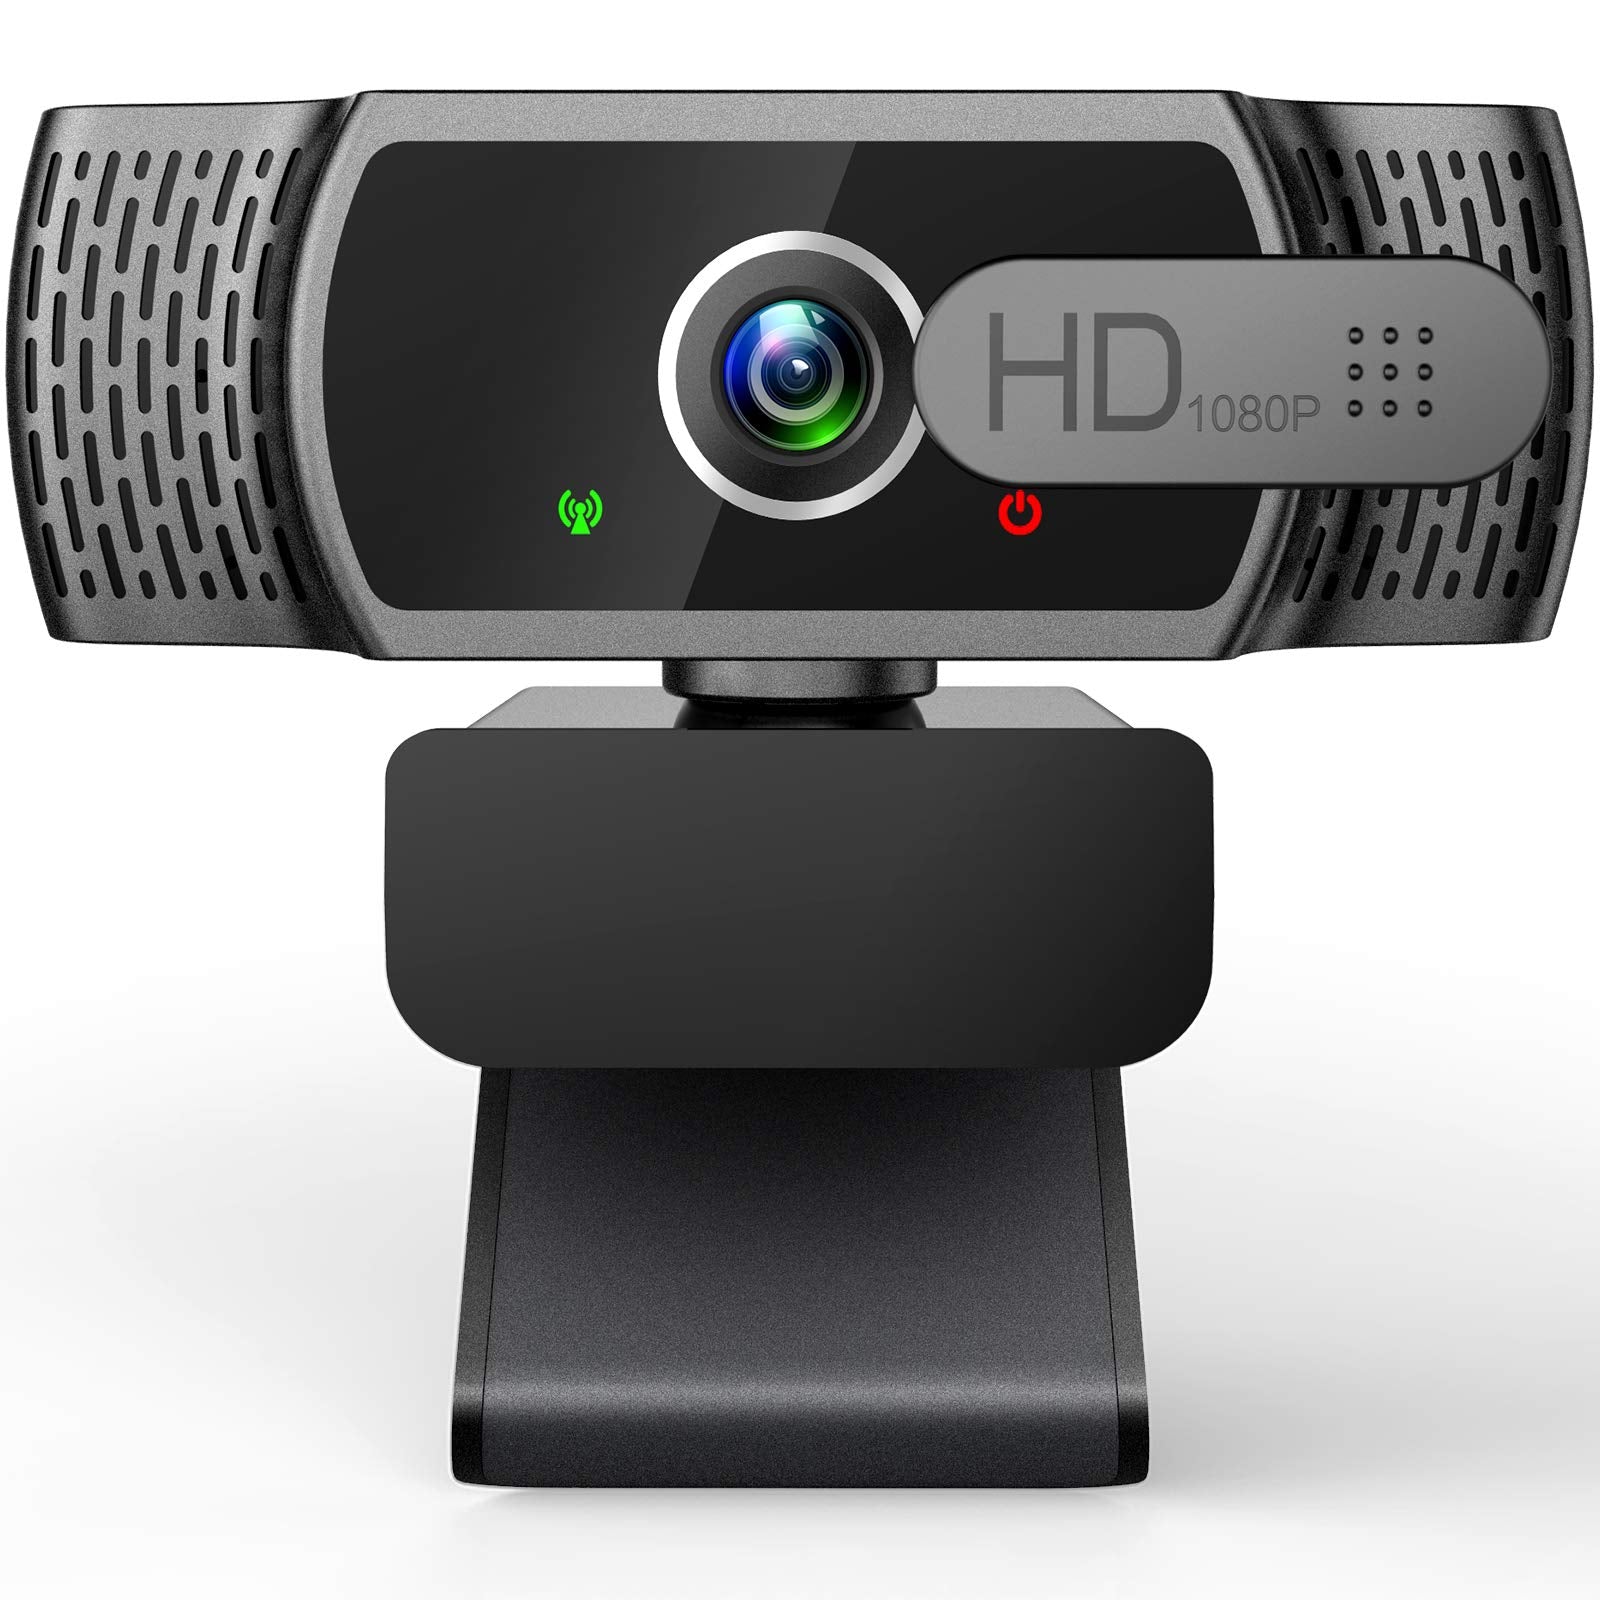 Webcam for PC with Microphone - 1080P FHD Webcam with Privacy Cover, Plug and Play USB Web Camera for Desktop & Laptop Conference, Meeting, Zoom, Skype, Facetime, Windows, Linux, and macOS